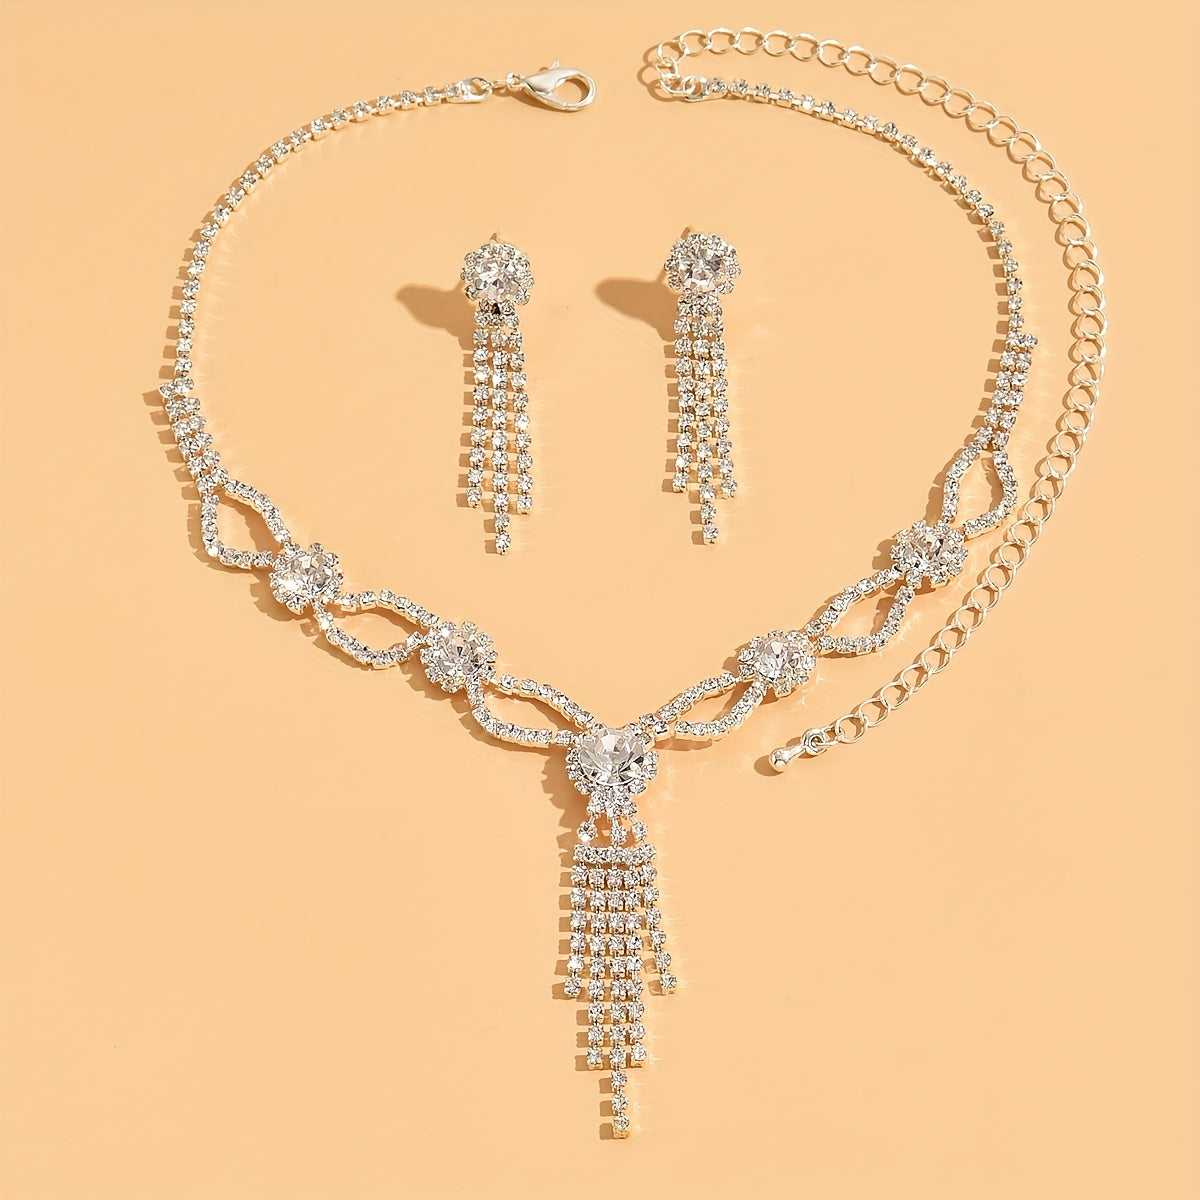 Elegant Rhinestone and Pearl Necklace and Earrings Set for Weddings and Parties